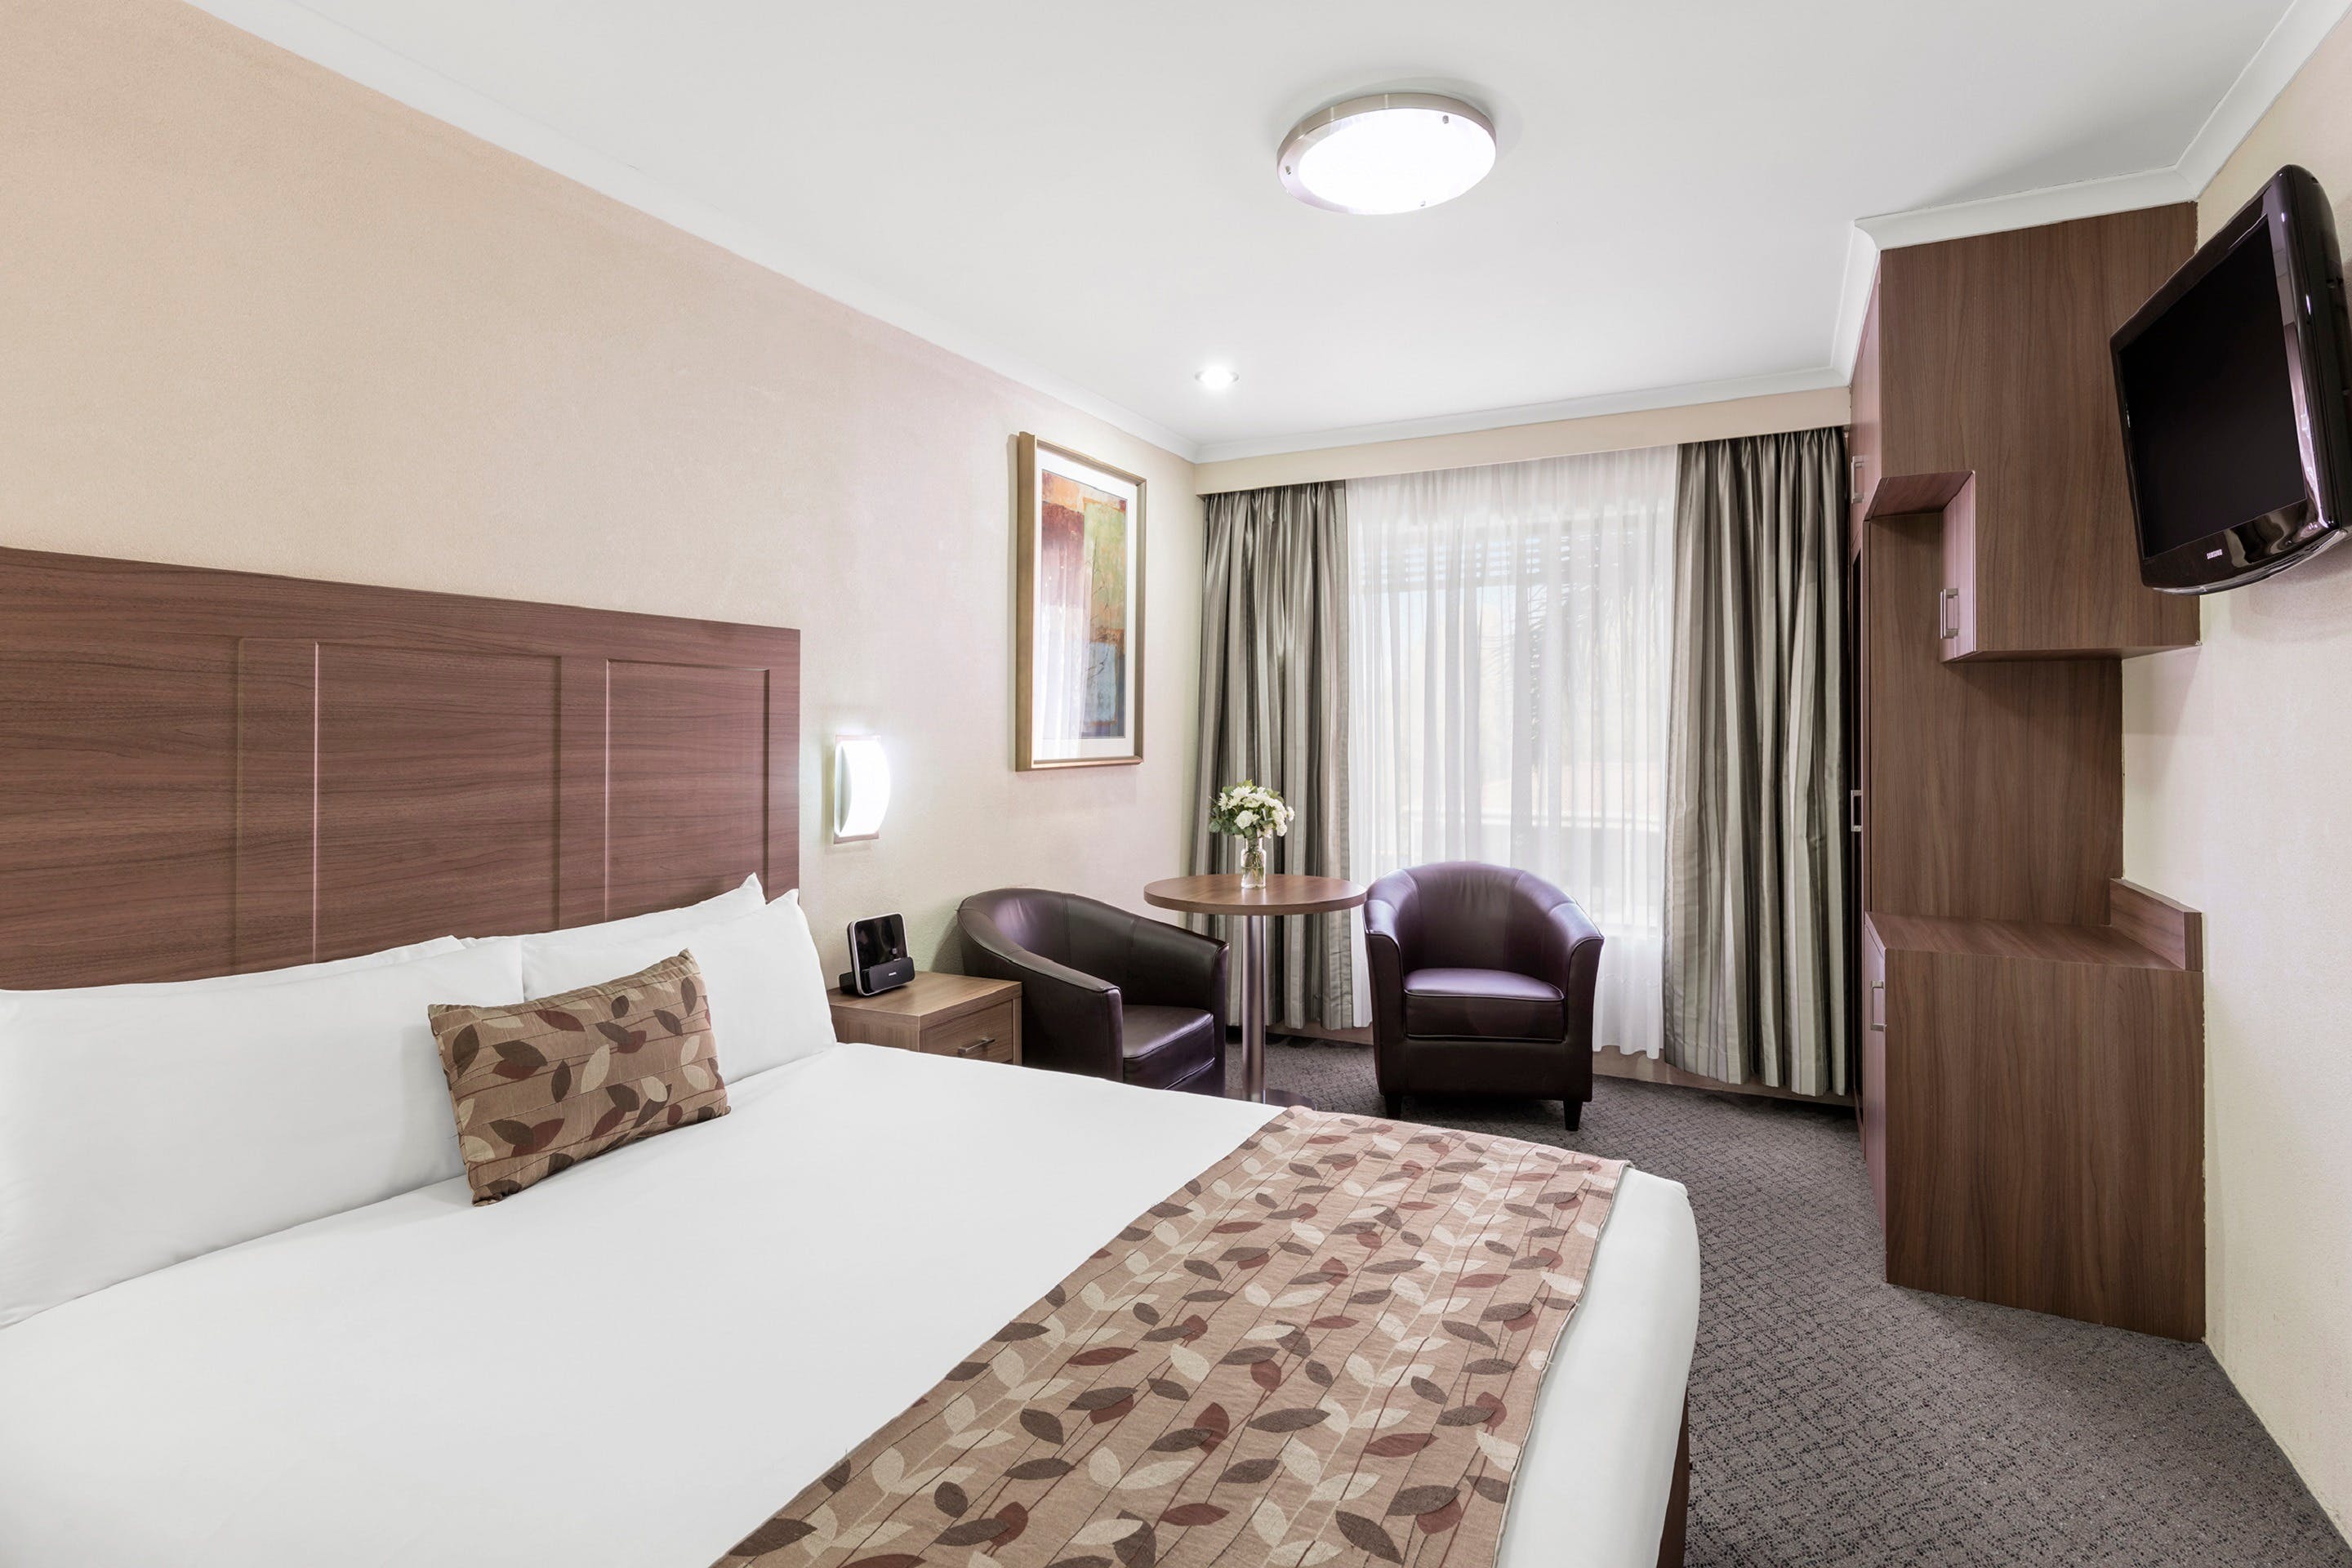 Garden City Hotel BW Signature Collection - Accommodation Directory